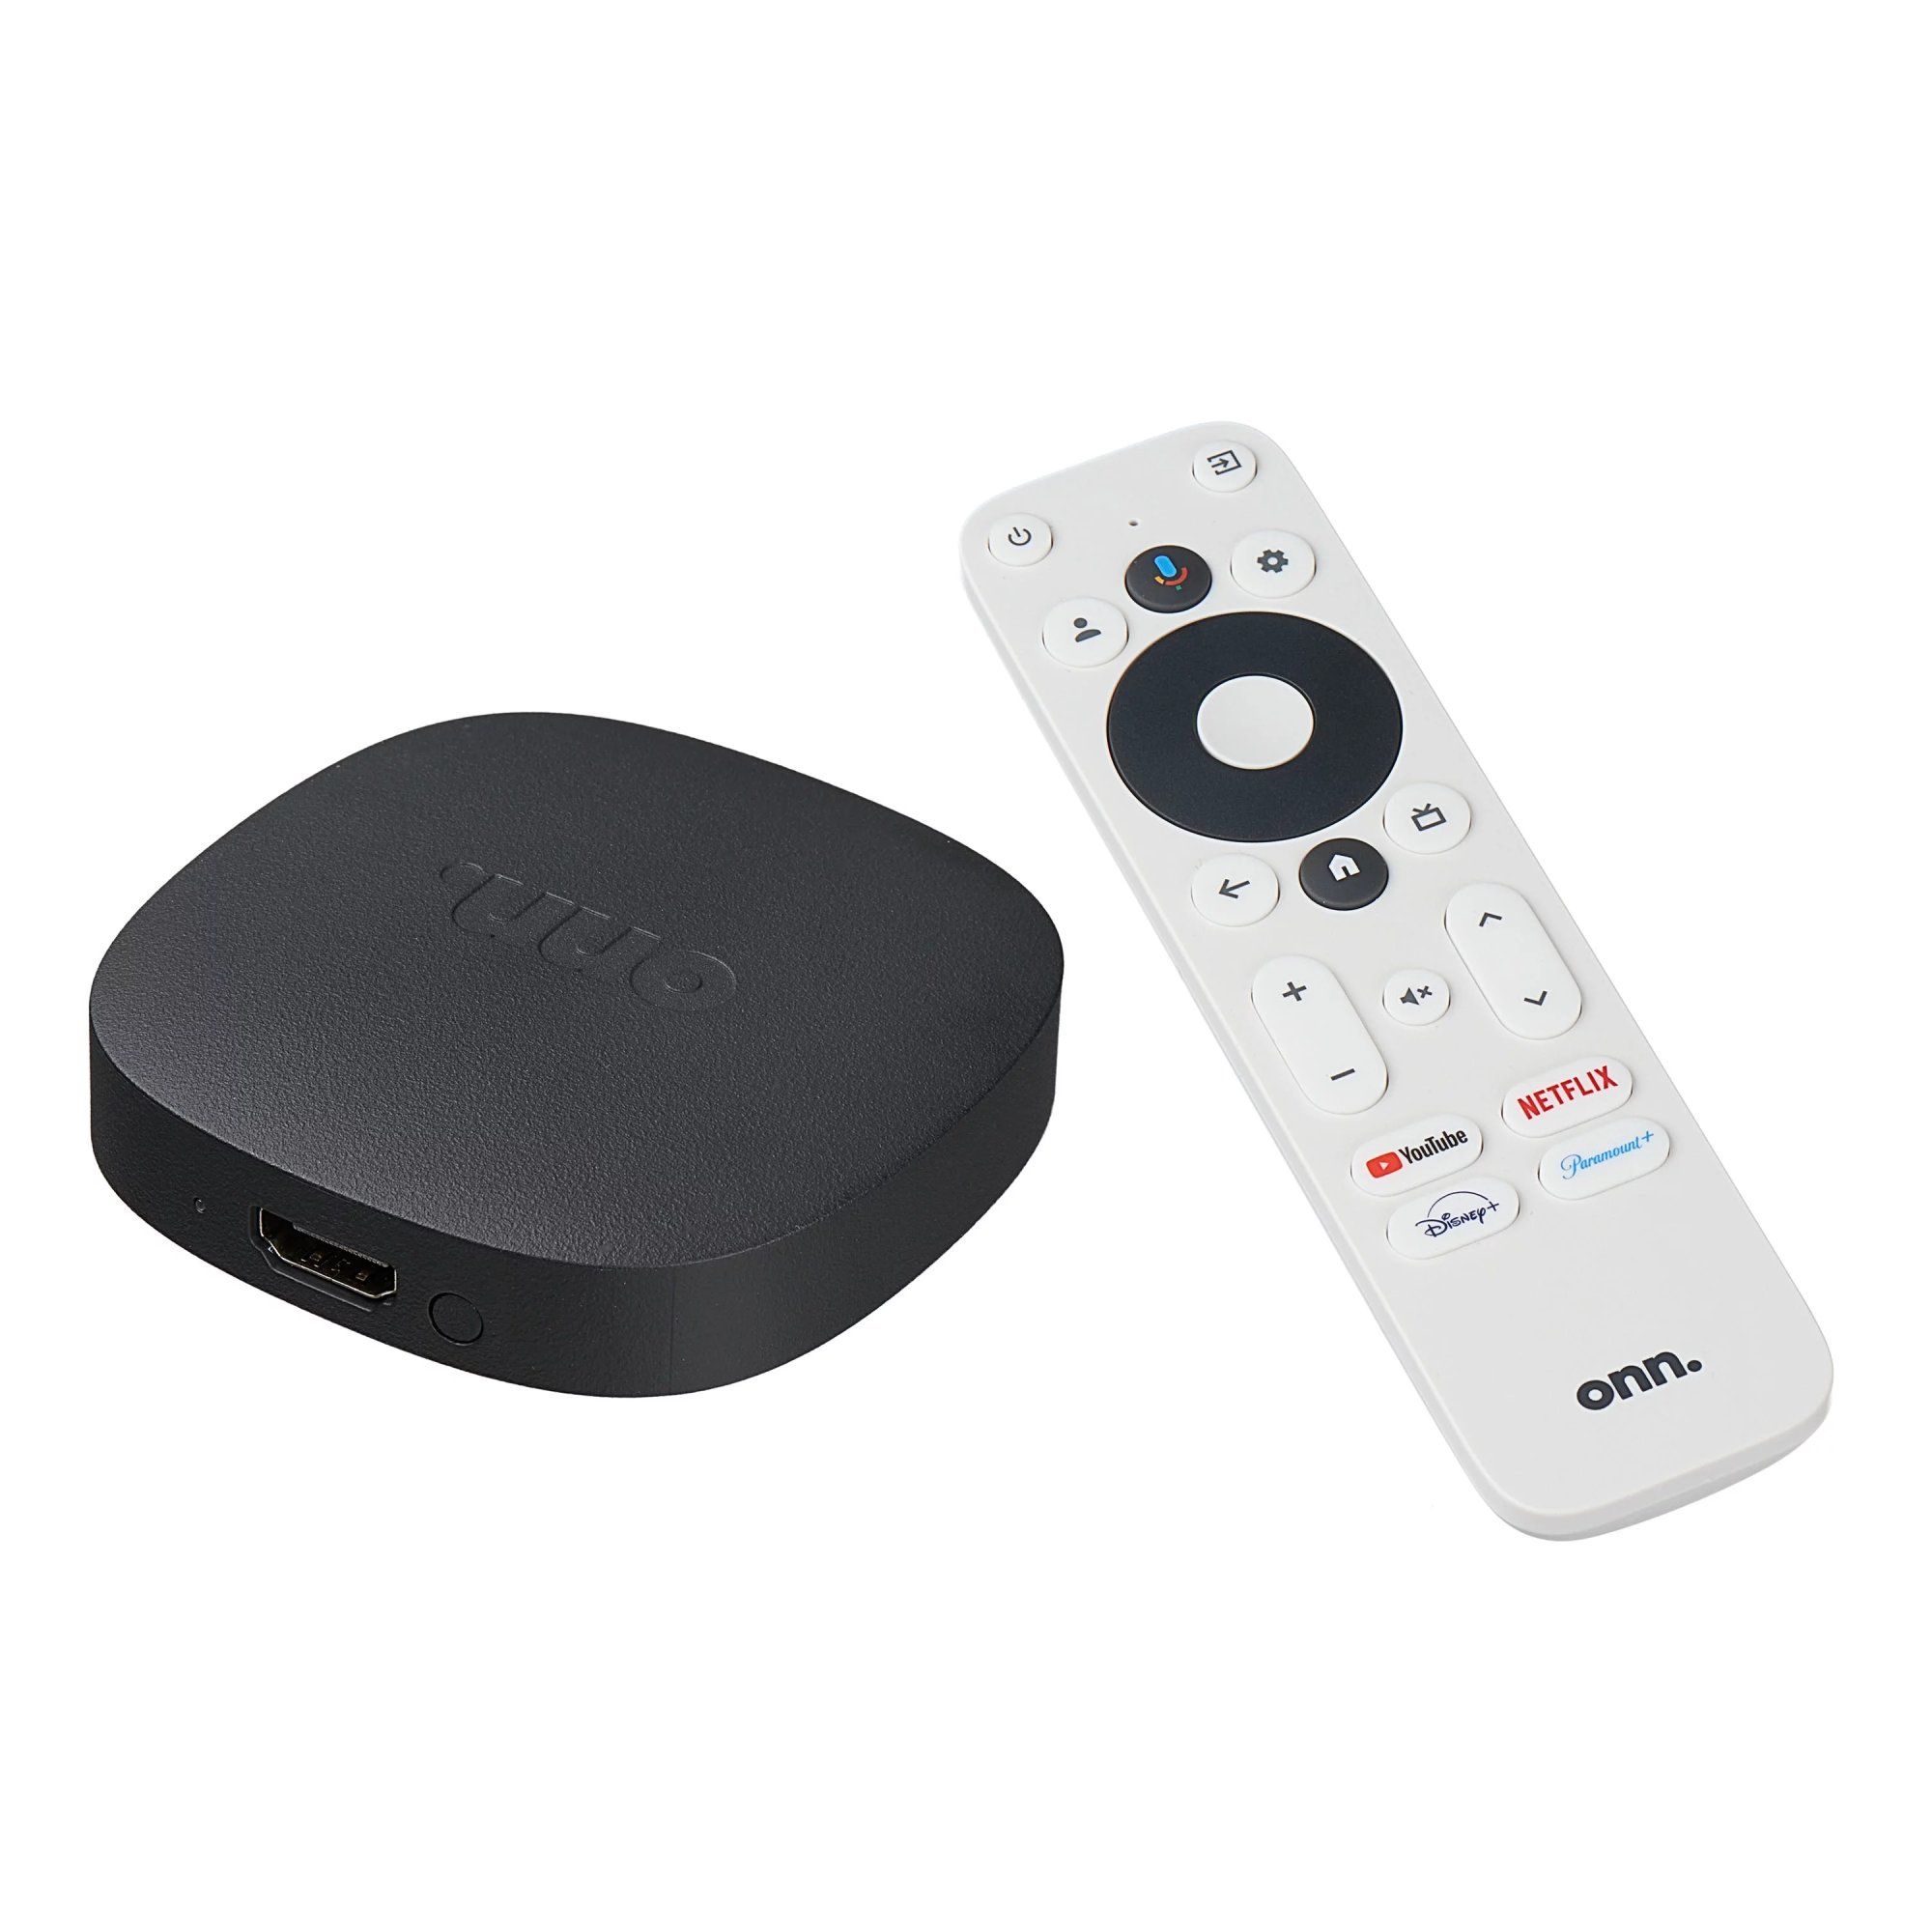 Onn Google TV 4K Streaming Box: For $20, you can't go wrong